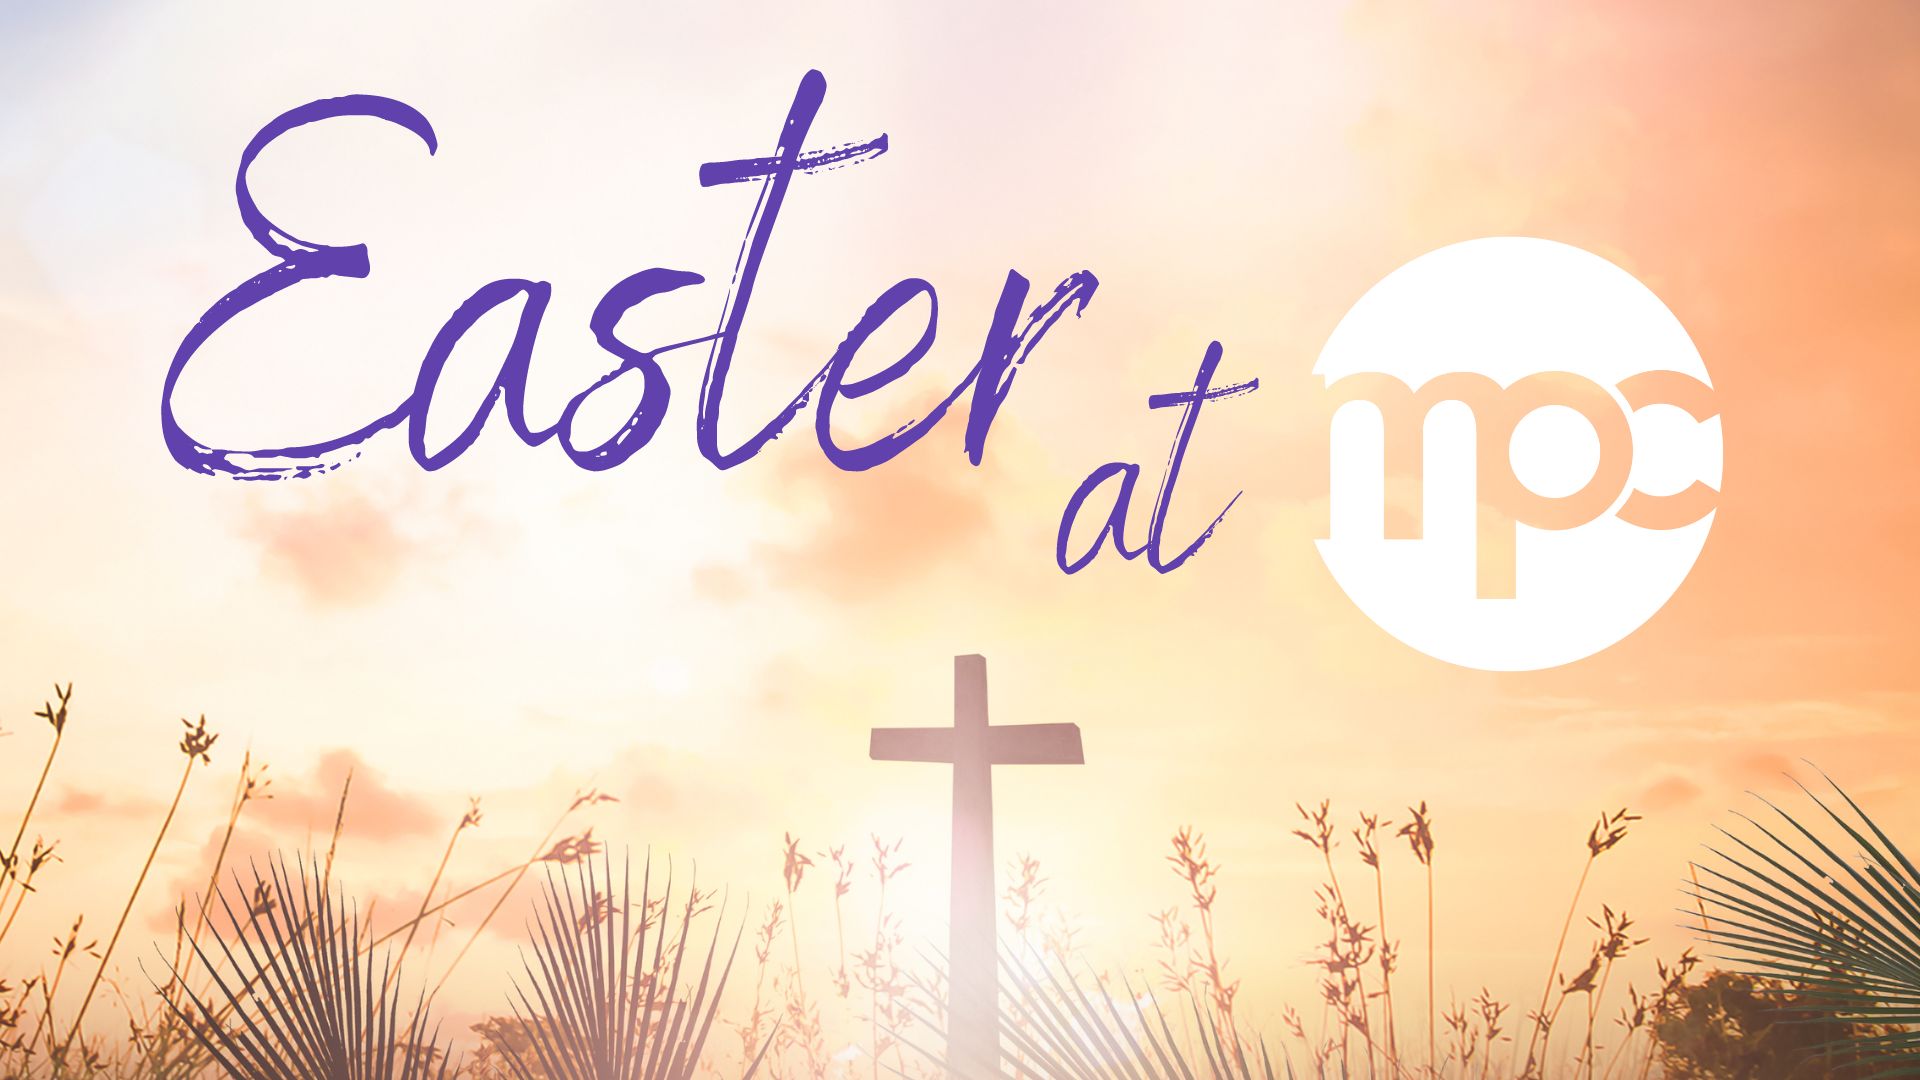 Easter at MPC

Join us for our Easter events and services.
